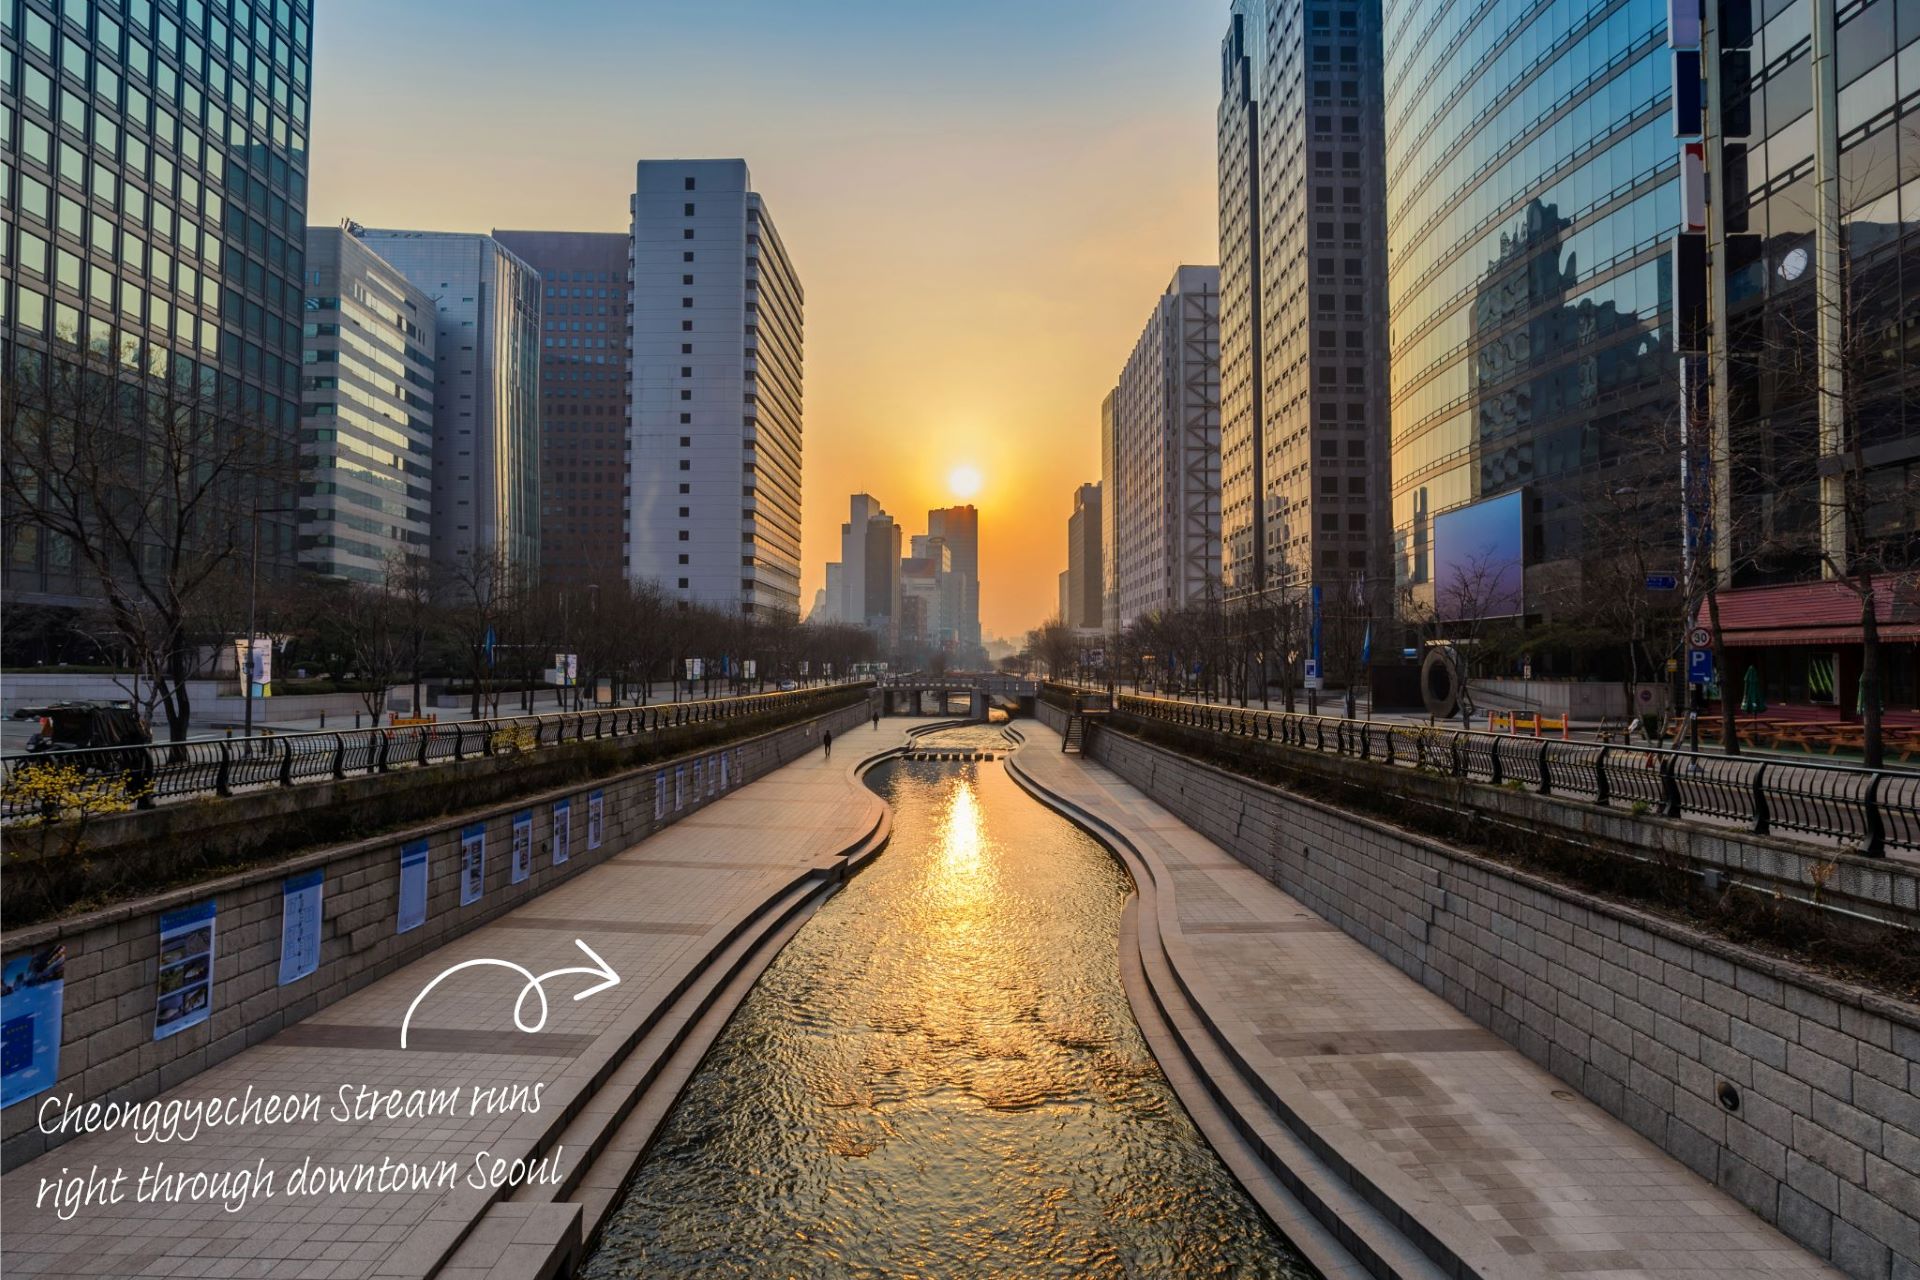 Cheonggyecheon Stream at sunrise, running through the centre of Seoul, high rises either side.